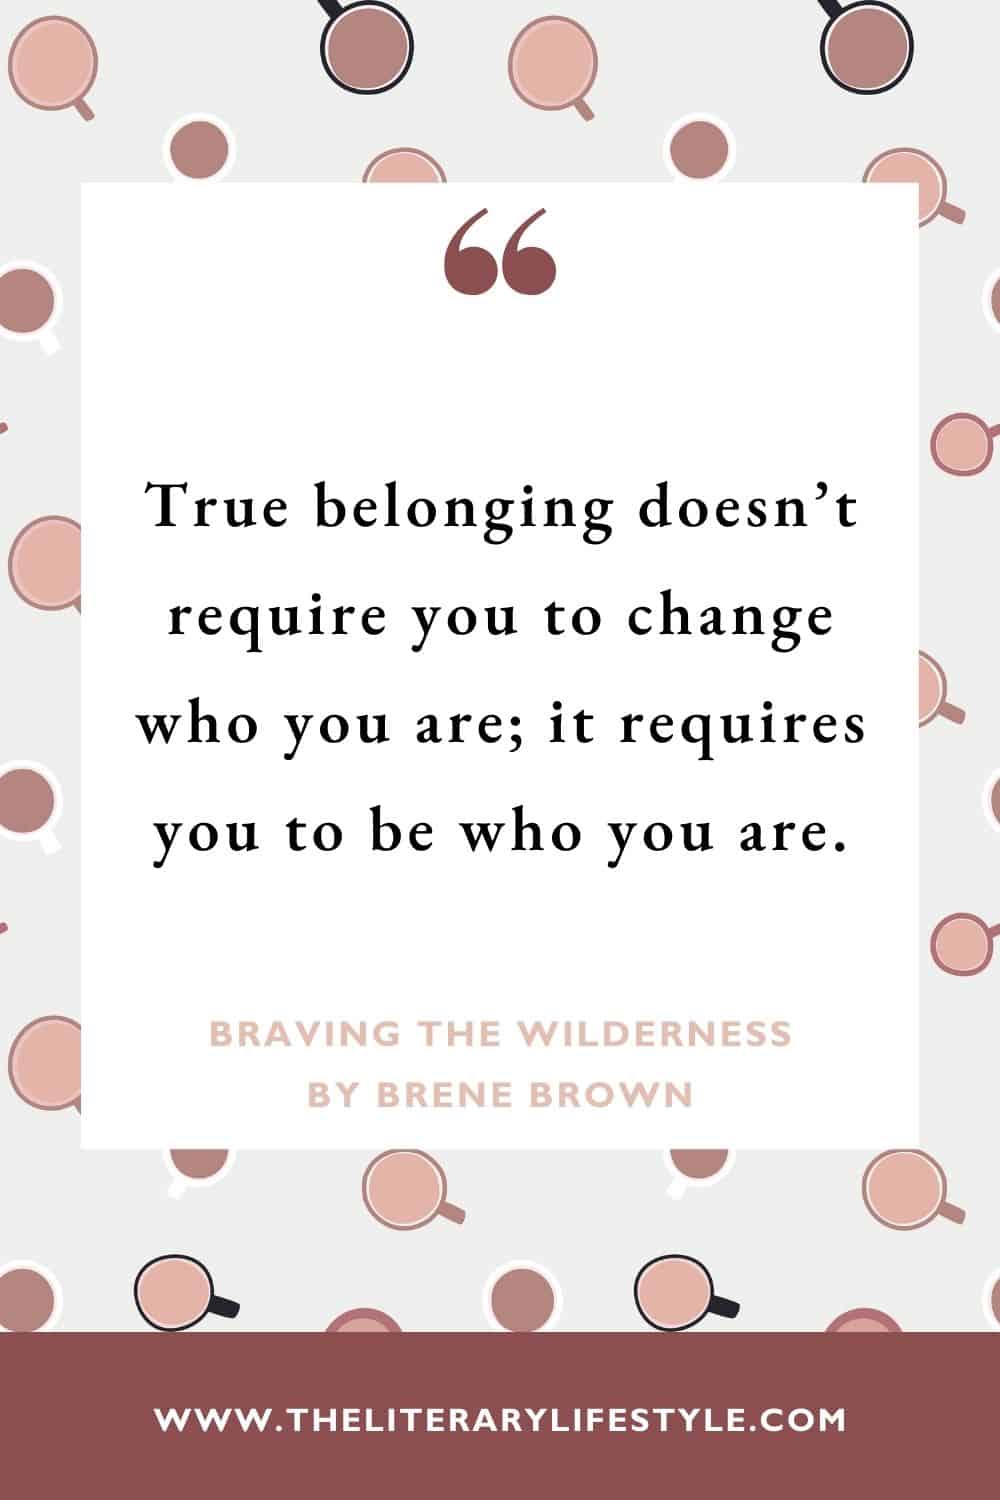 Braving the Wilderness quote by brene brown about true belonging